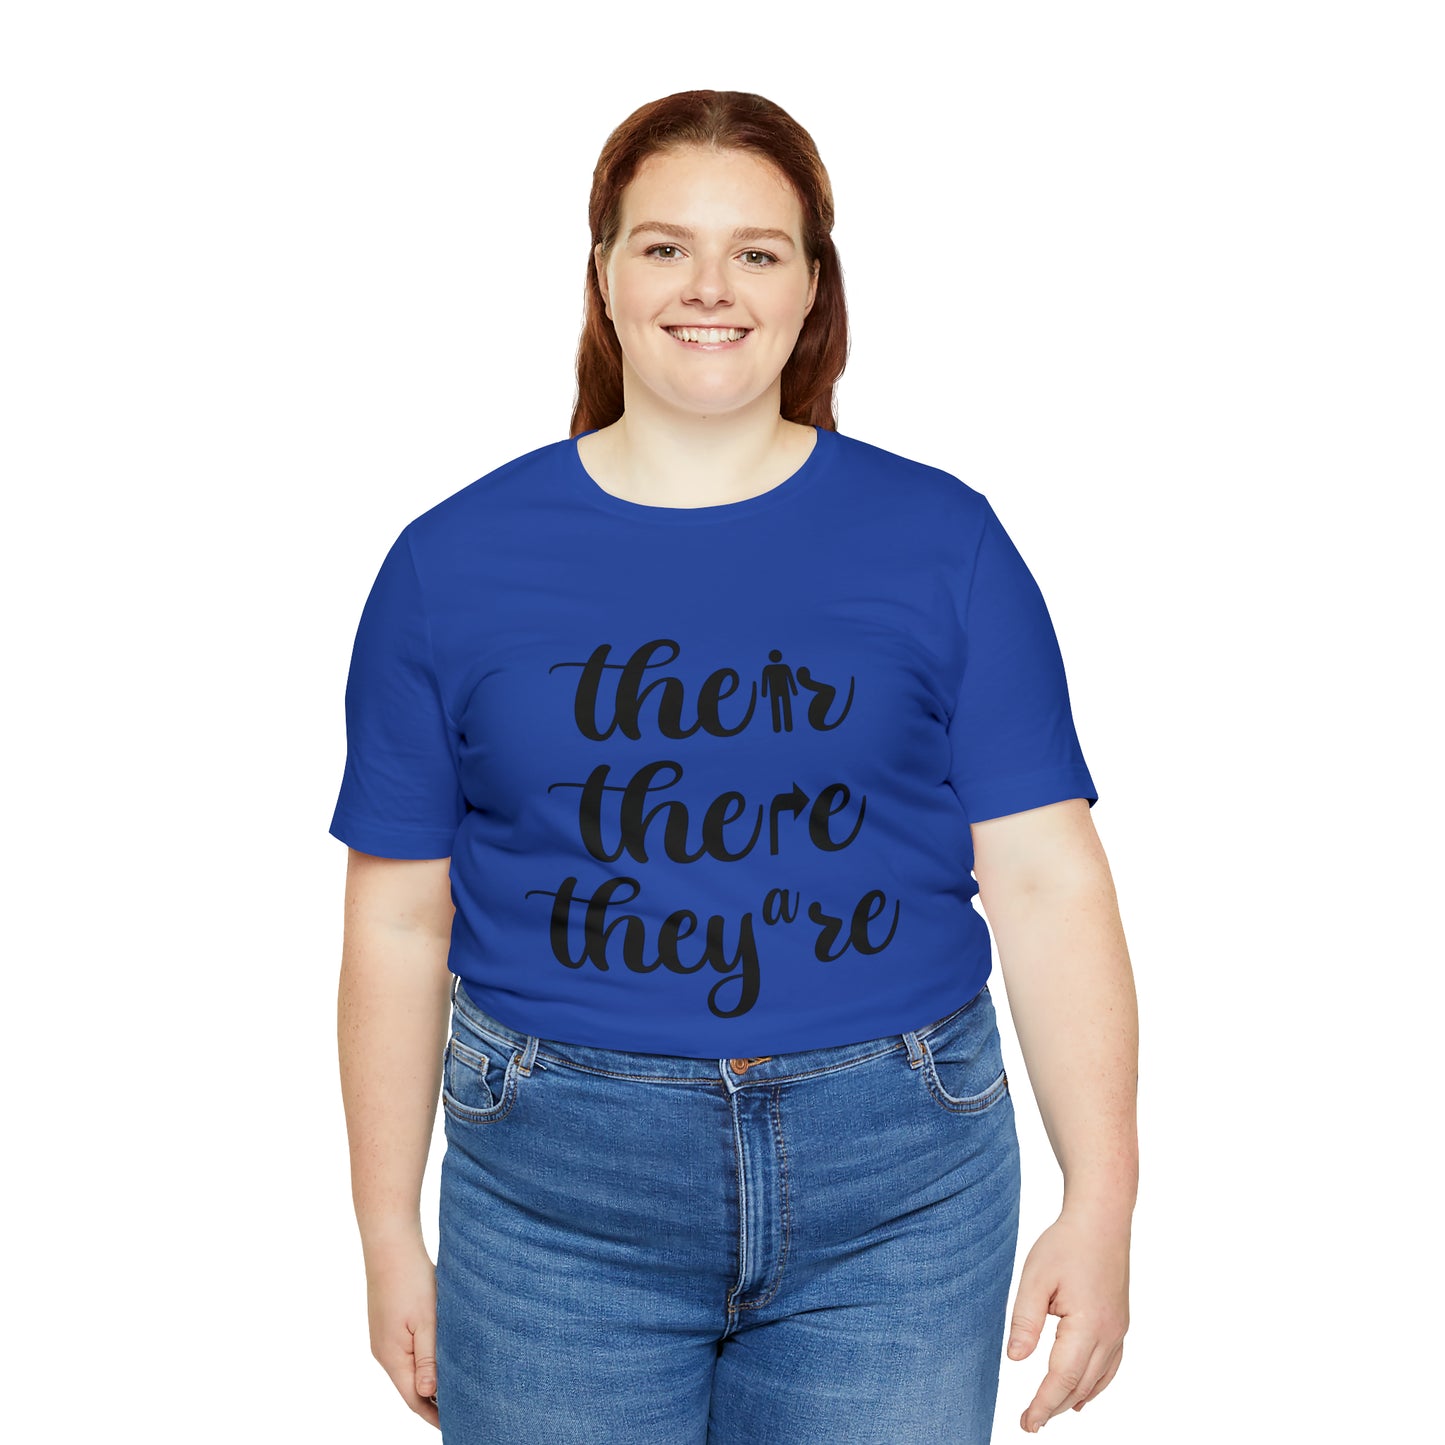 "Their, there, they're" Unisex Jersey Short Sleeve Tee